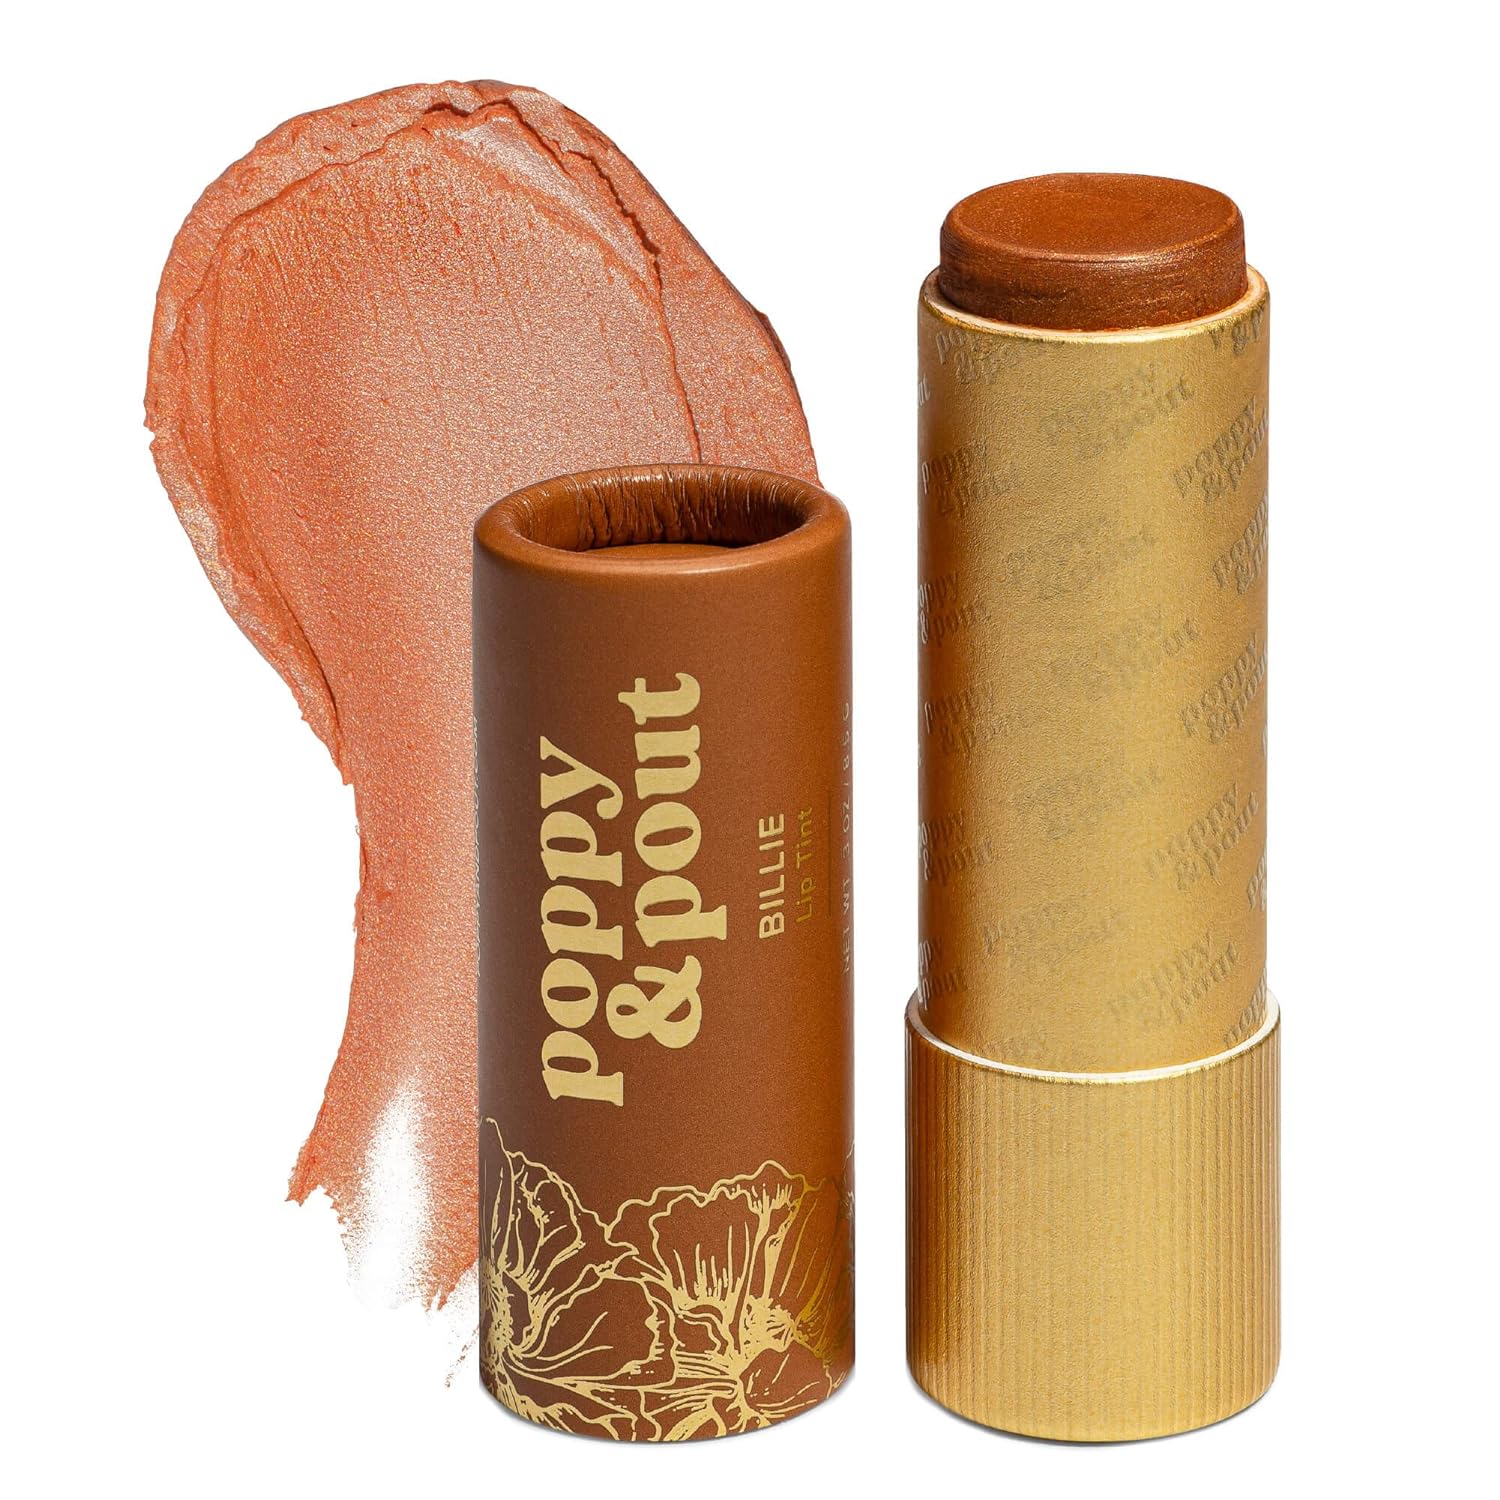 Poppy and Pout Lip Tint - Billie